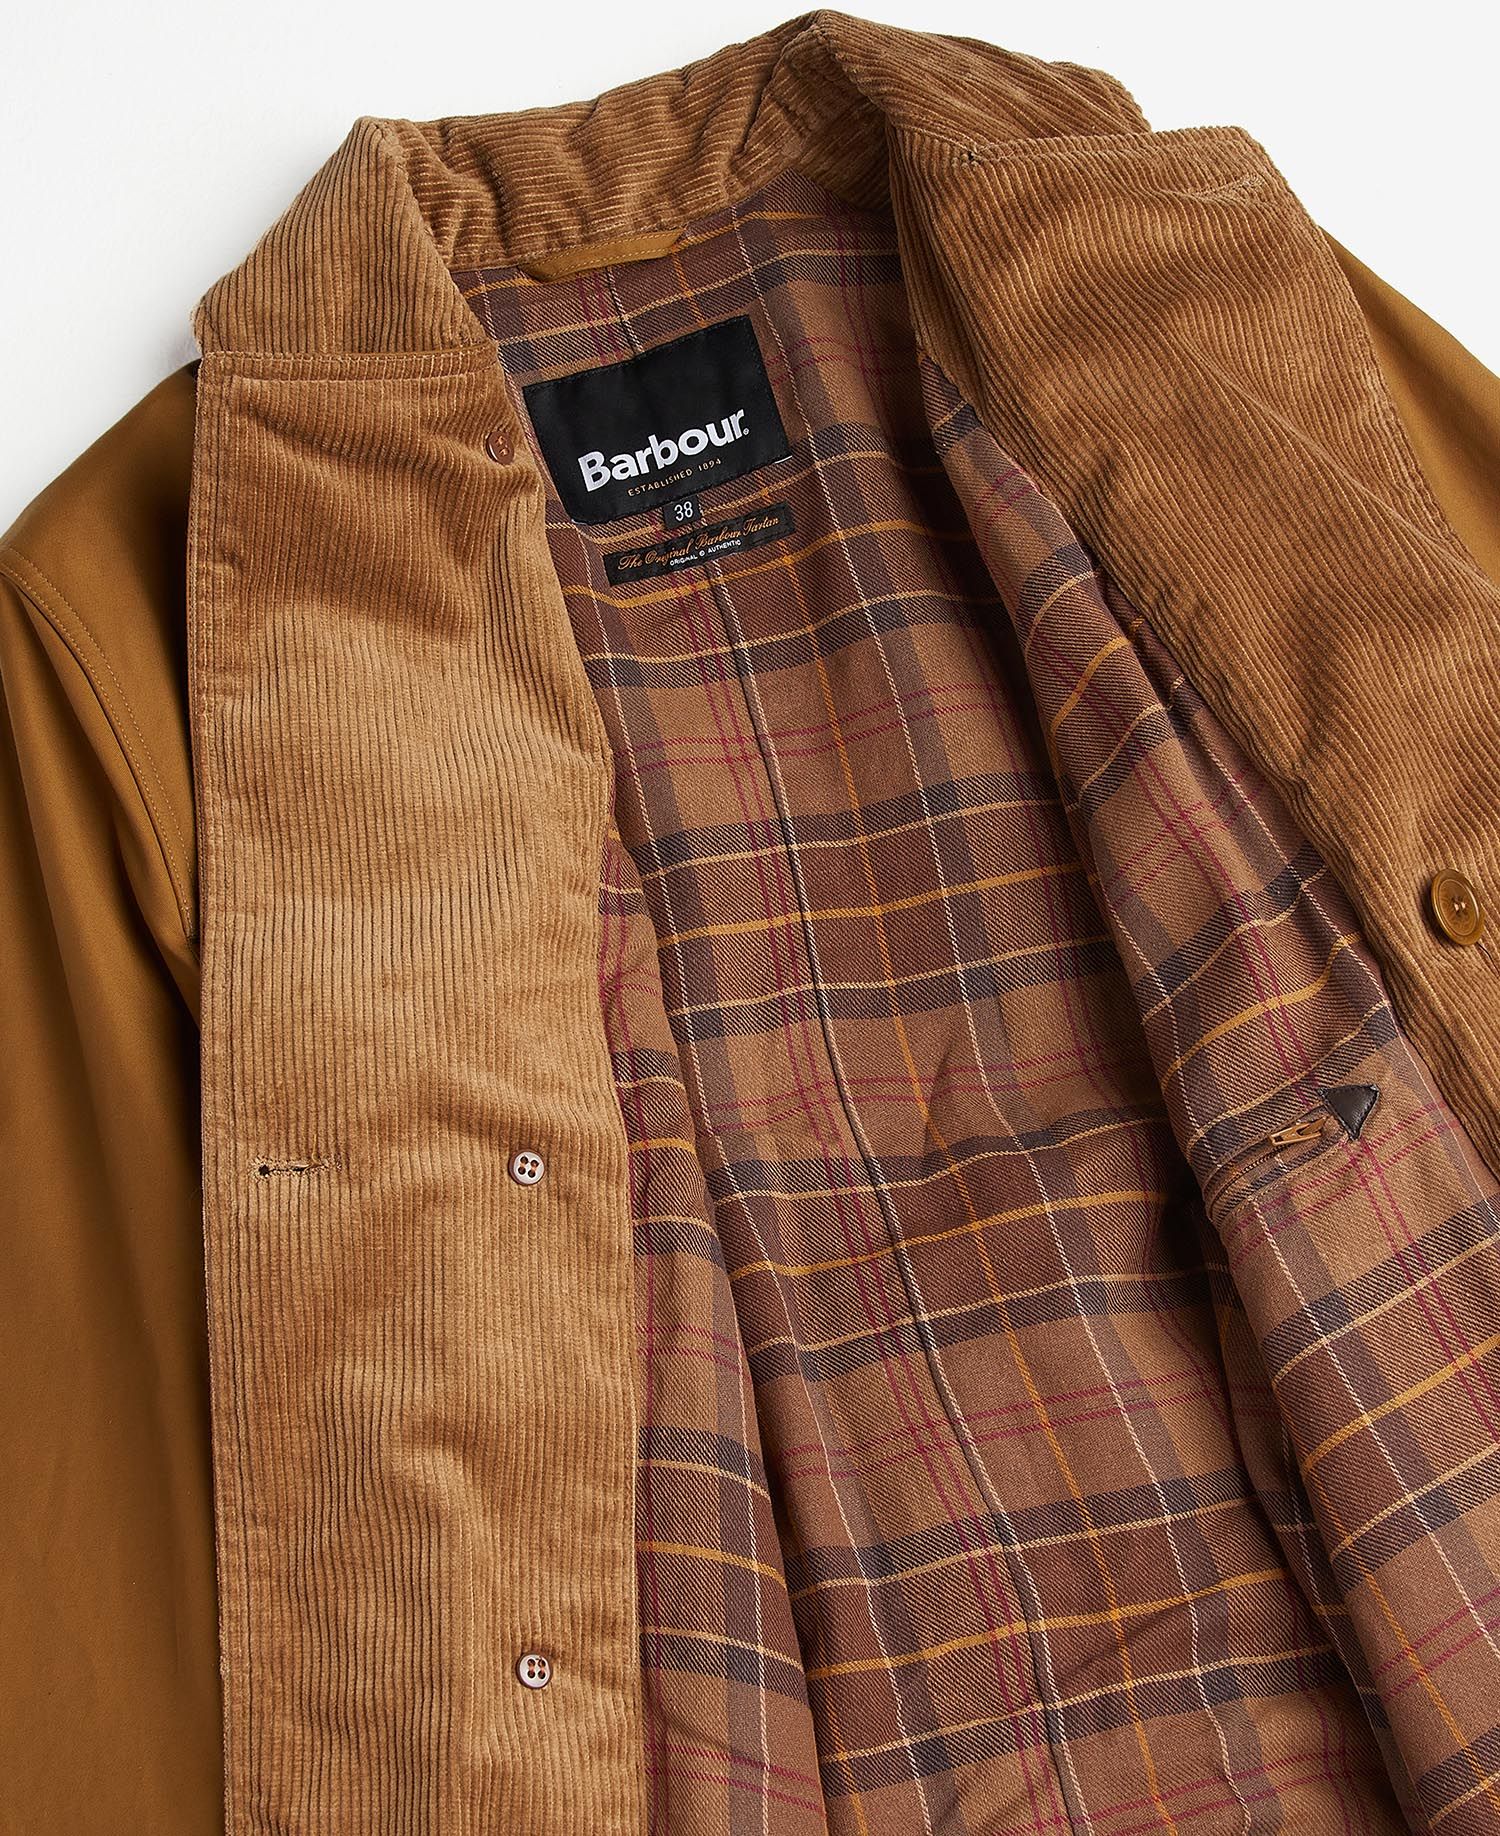 Shop the Barbour Whitley Casual Trench Coat in Brown today. | Barbour